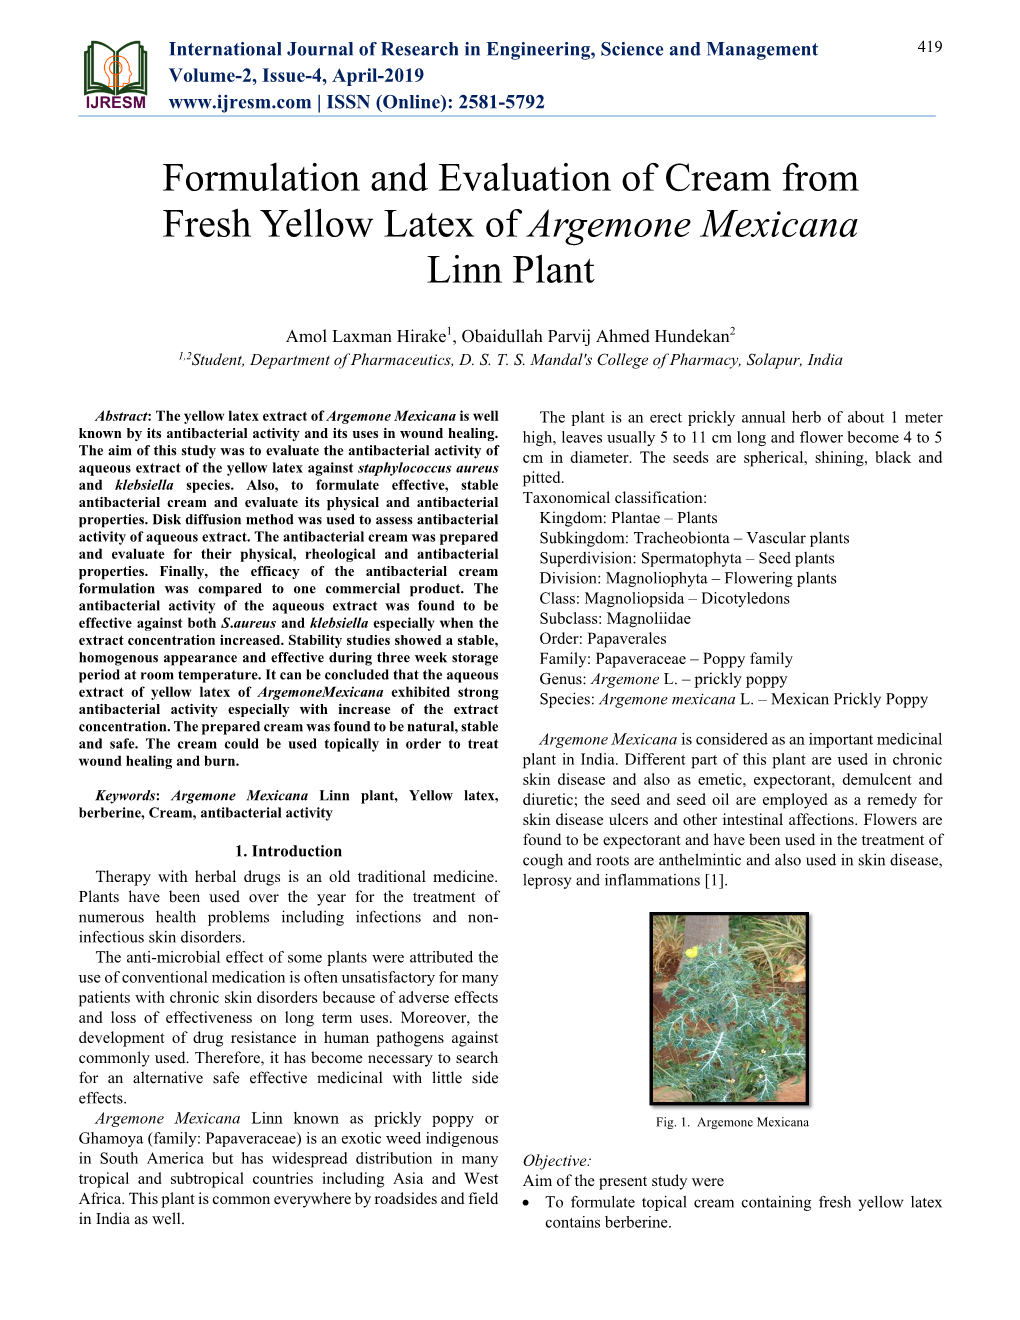 Formulation and Evaluation of Cream from Fresh Yellow Latex of Argemone Mexicana Linn Plant